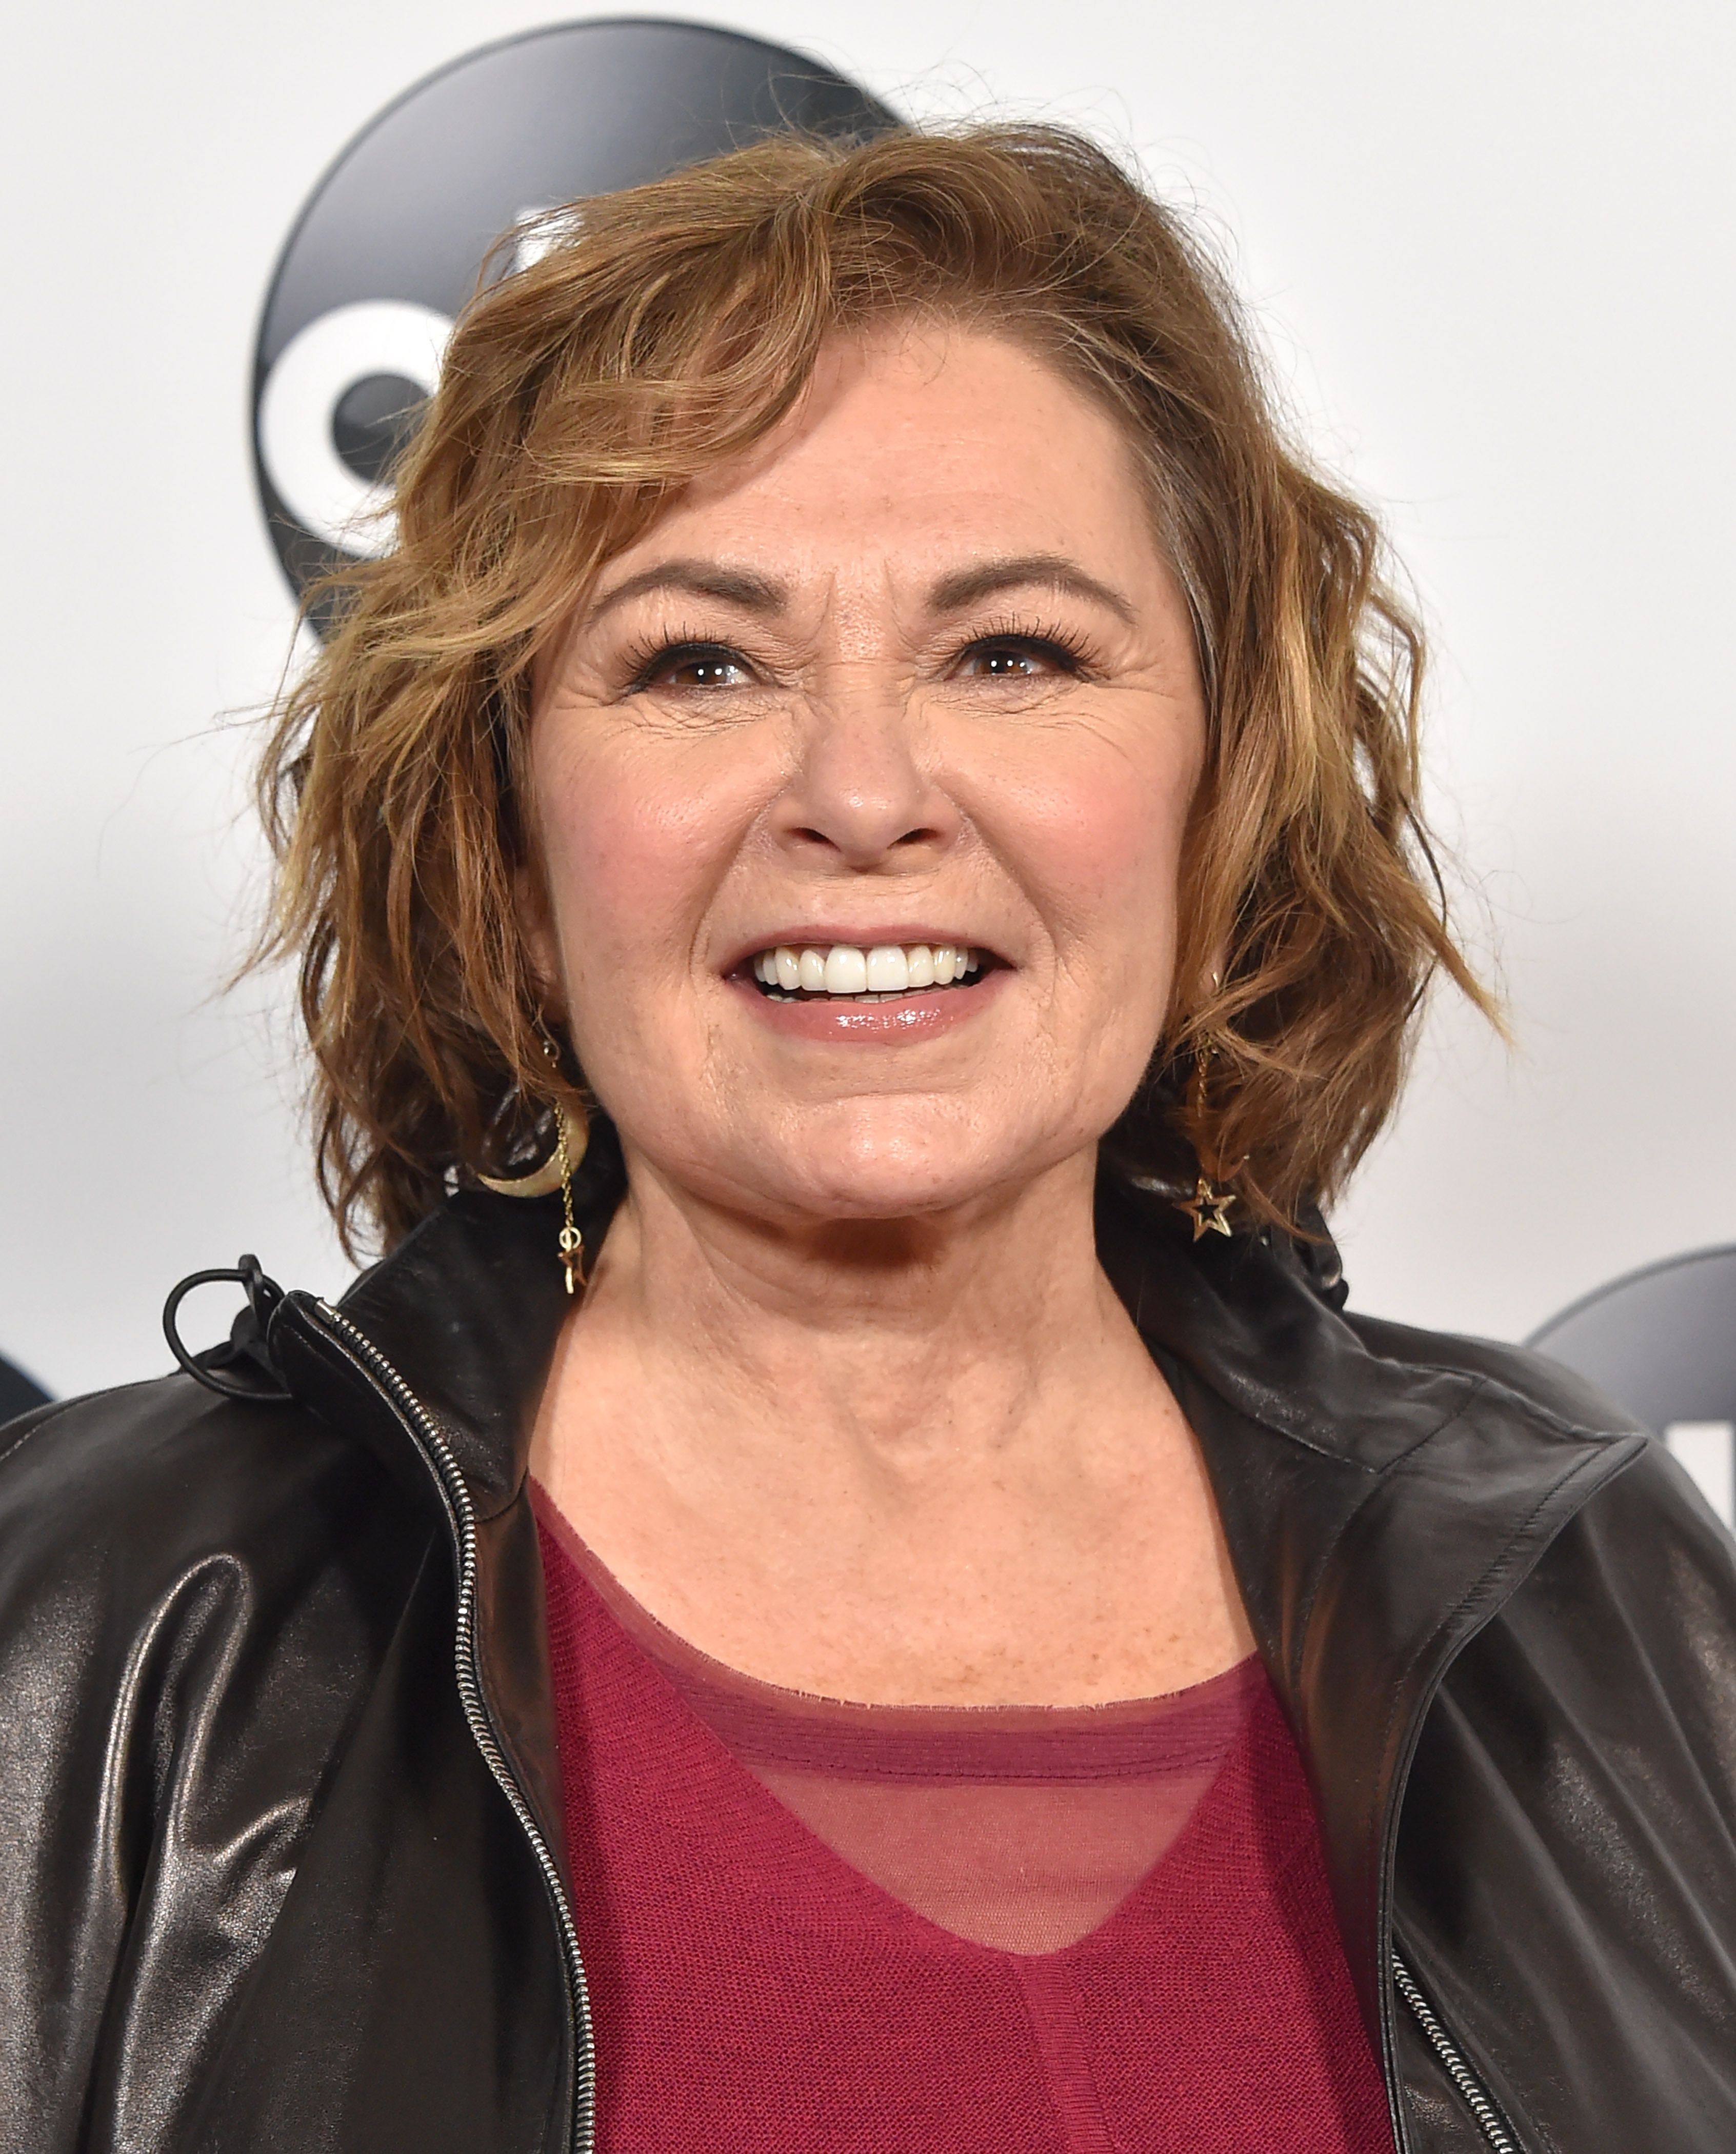 Roseanne Barr wears a red shirt and black jacket.